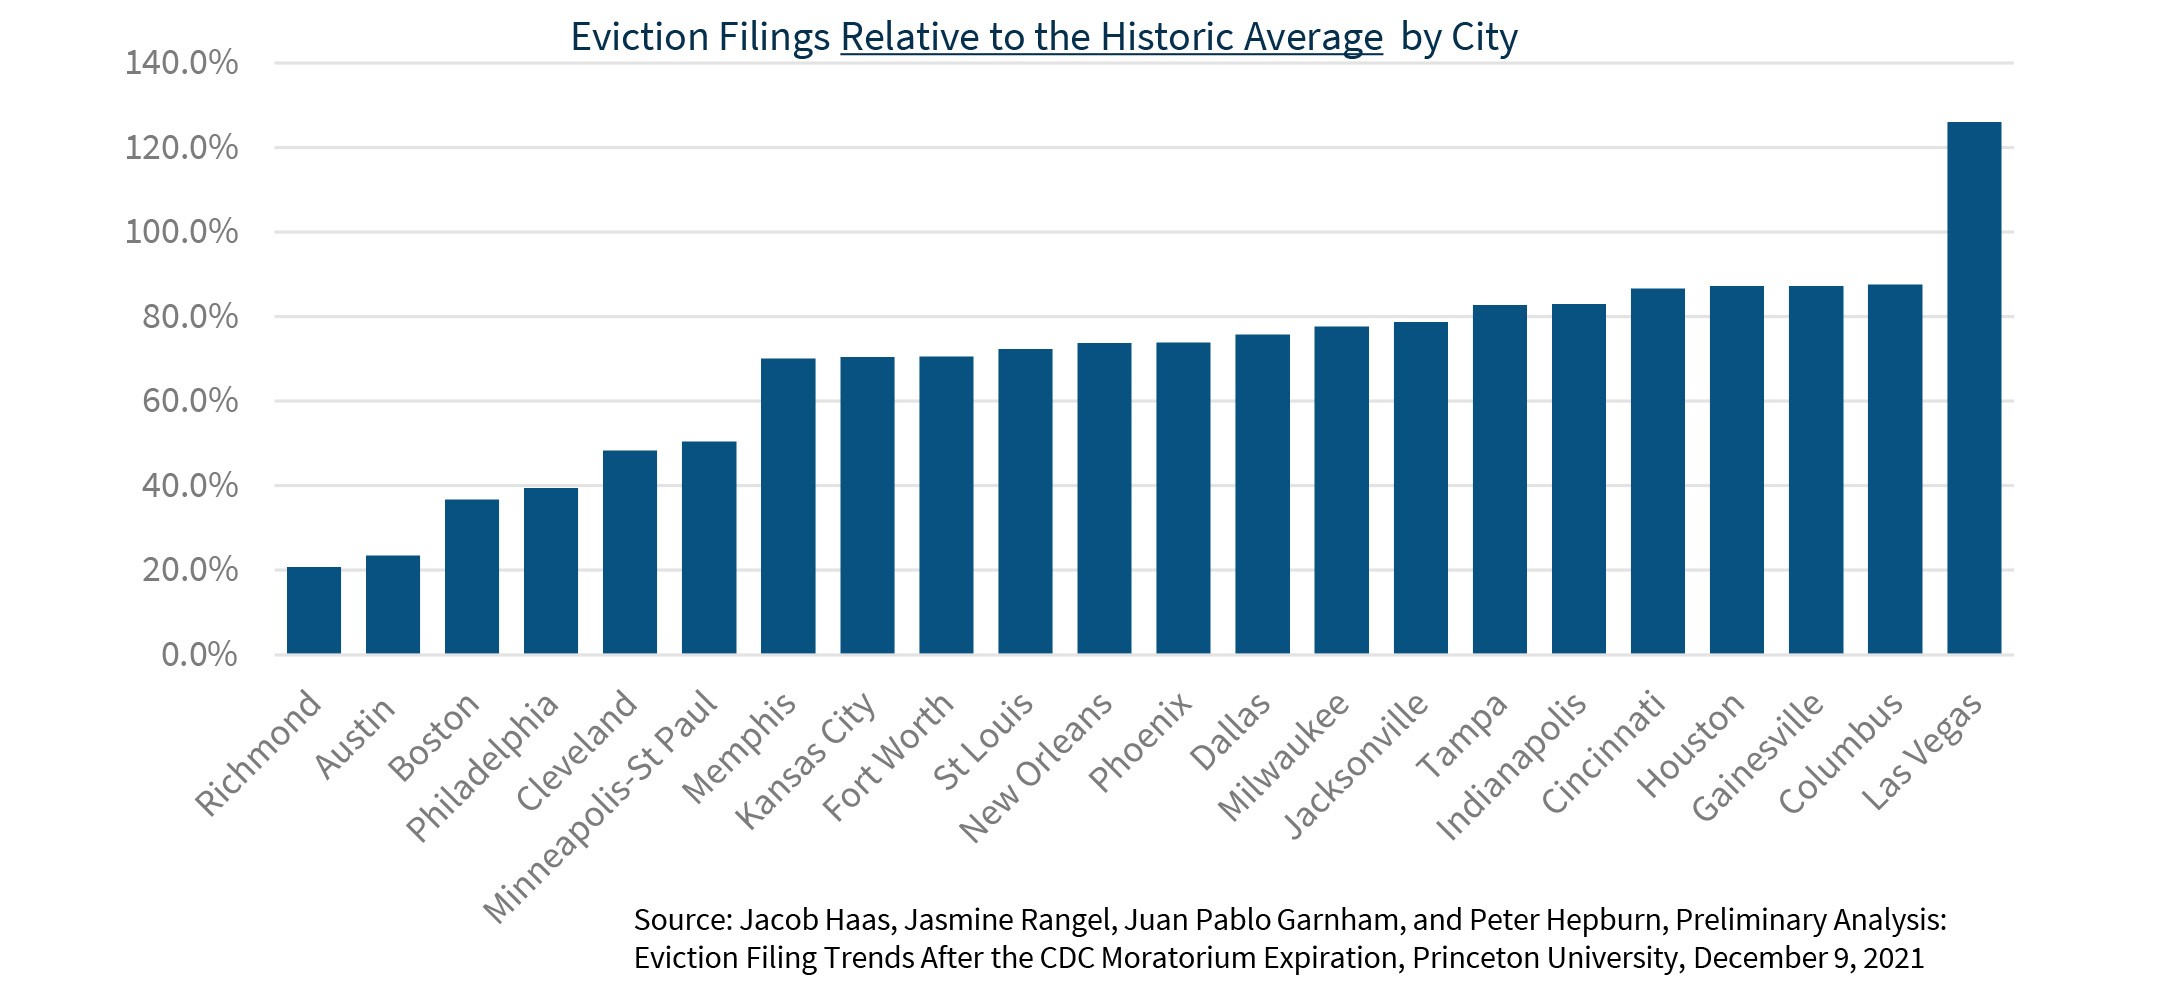 Eviction Filings Relative to the Historic Average by City